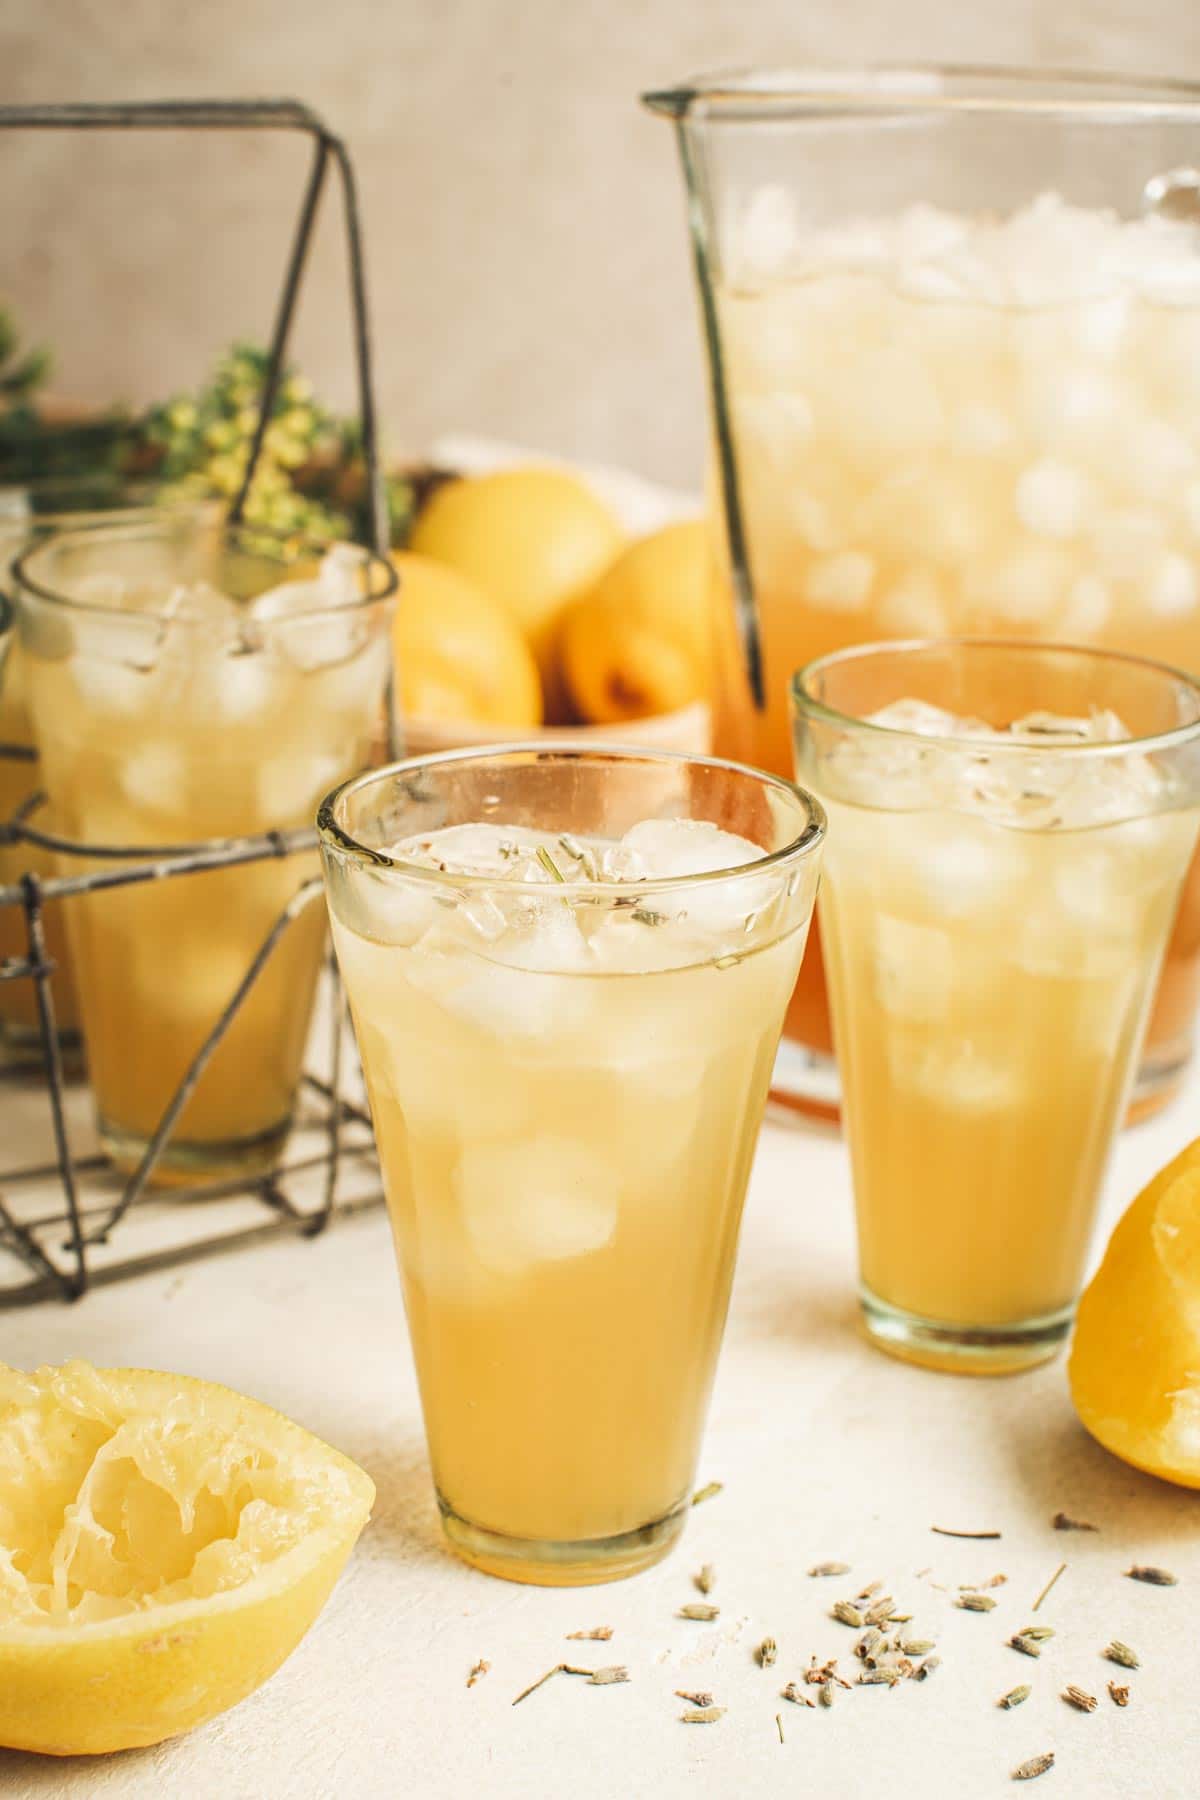 Lavender lemonade in a glass with a pitcher and additional glasses with lemonade behind it.